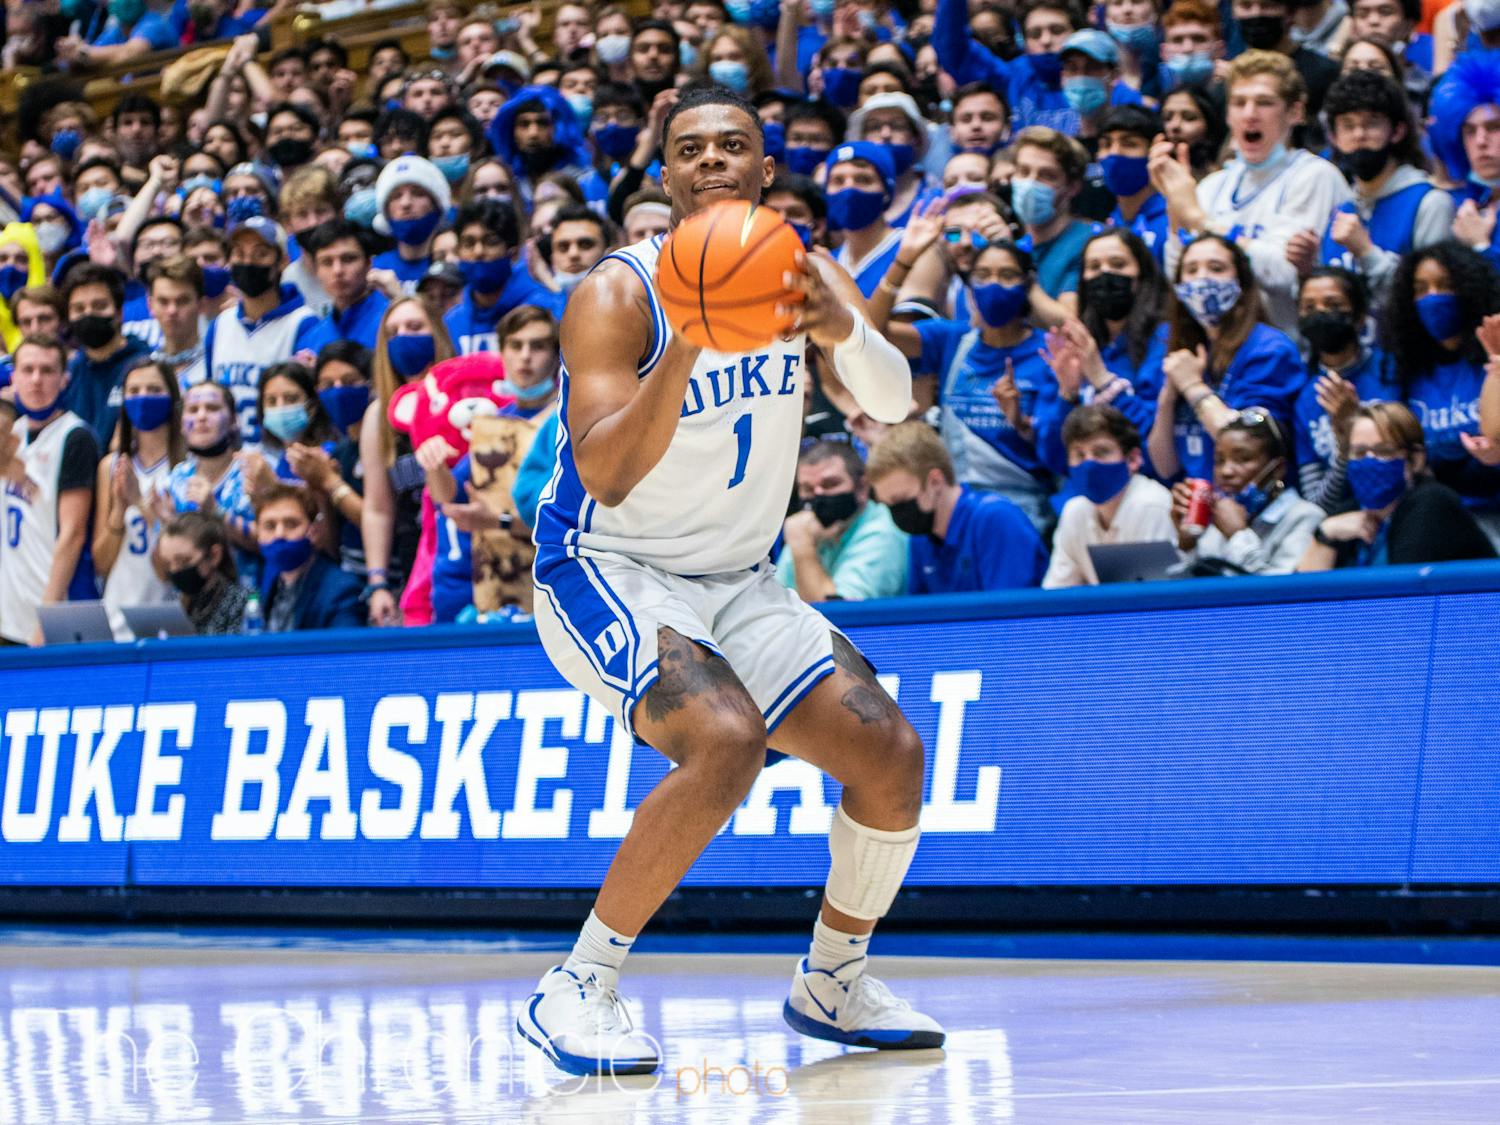 Freshman guard Trevor Keels knocked down Duke's first three of the game against Appalachian State.